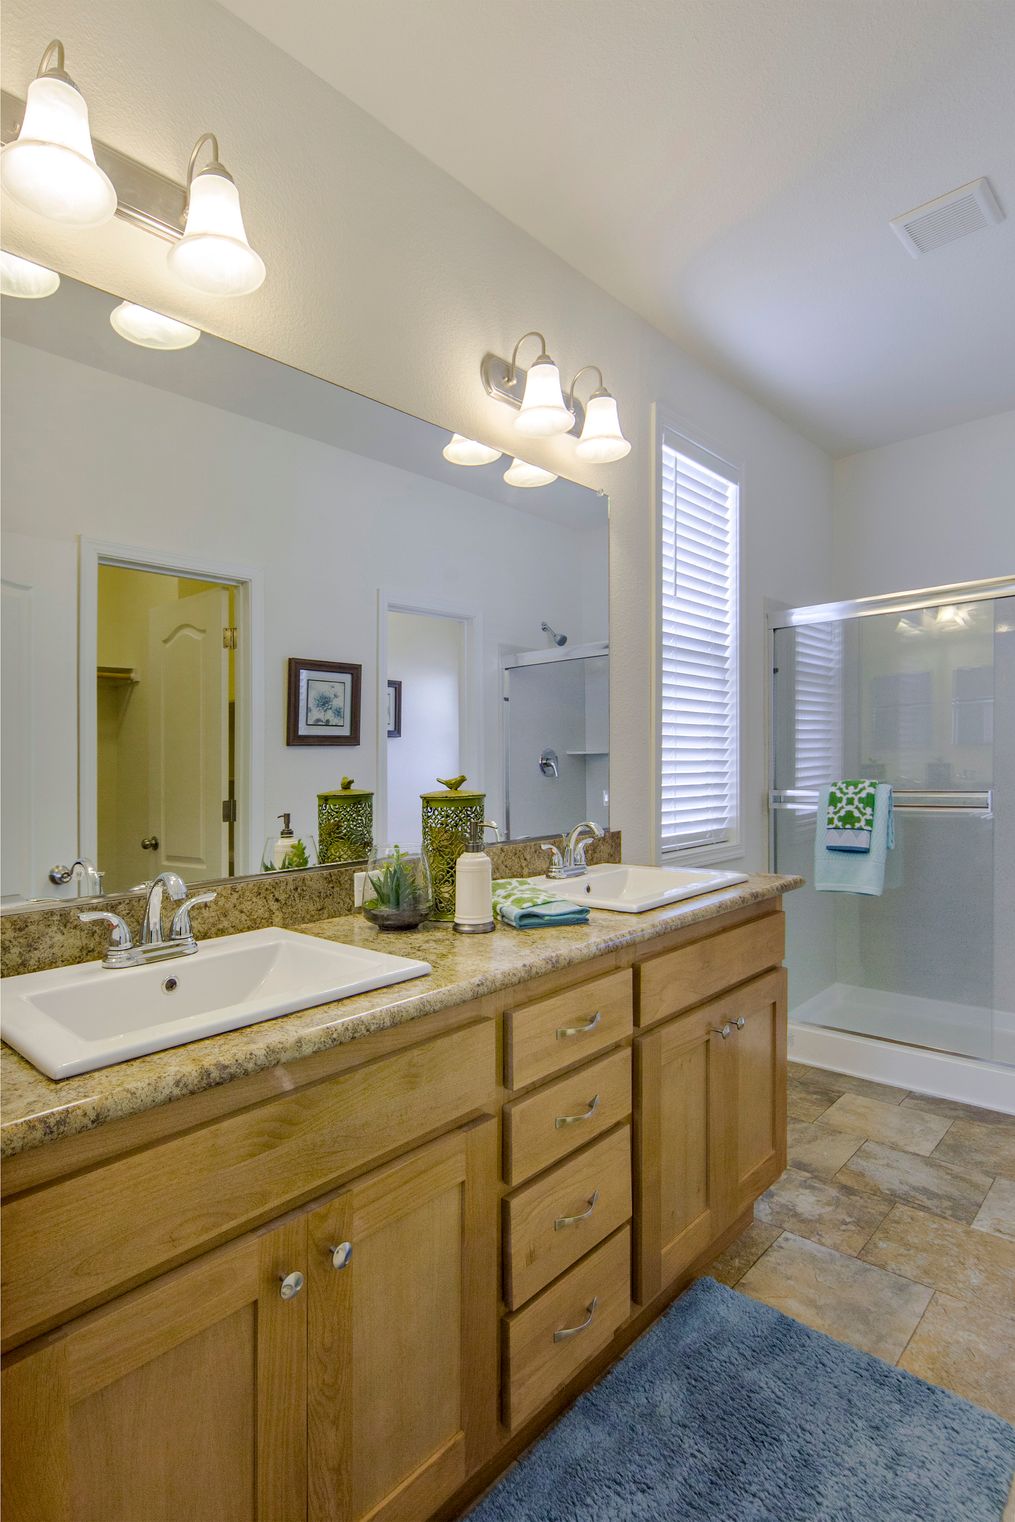 The MORRO BAY 27523-B Primary Bathroom. This Manufactured Mobile Home features 3 bedrooms and 2 baths.